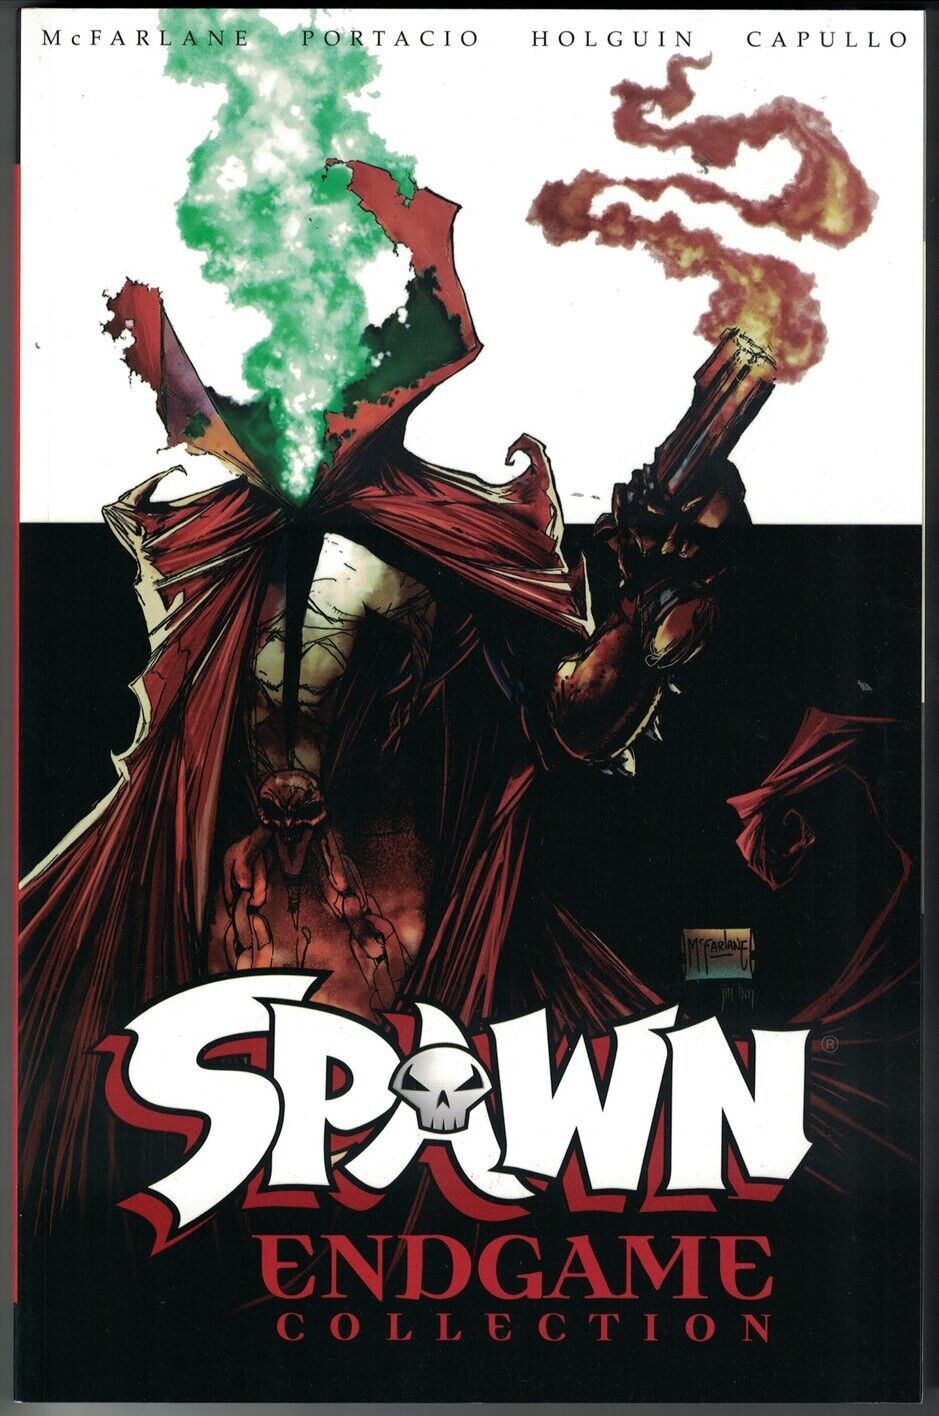 SPAWN ENDGAME COLLECTION TP TPB $24.99srp Todd McFarlane #185-196 NEW NM